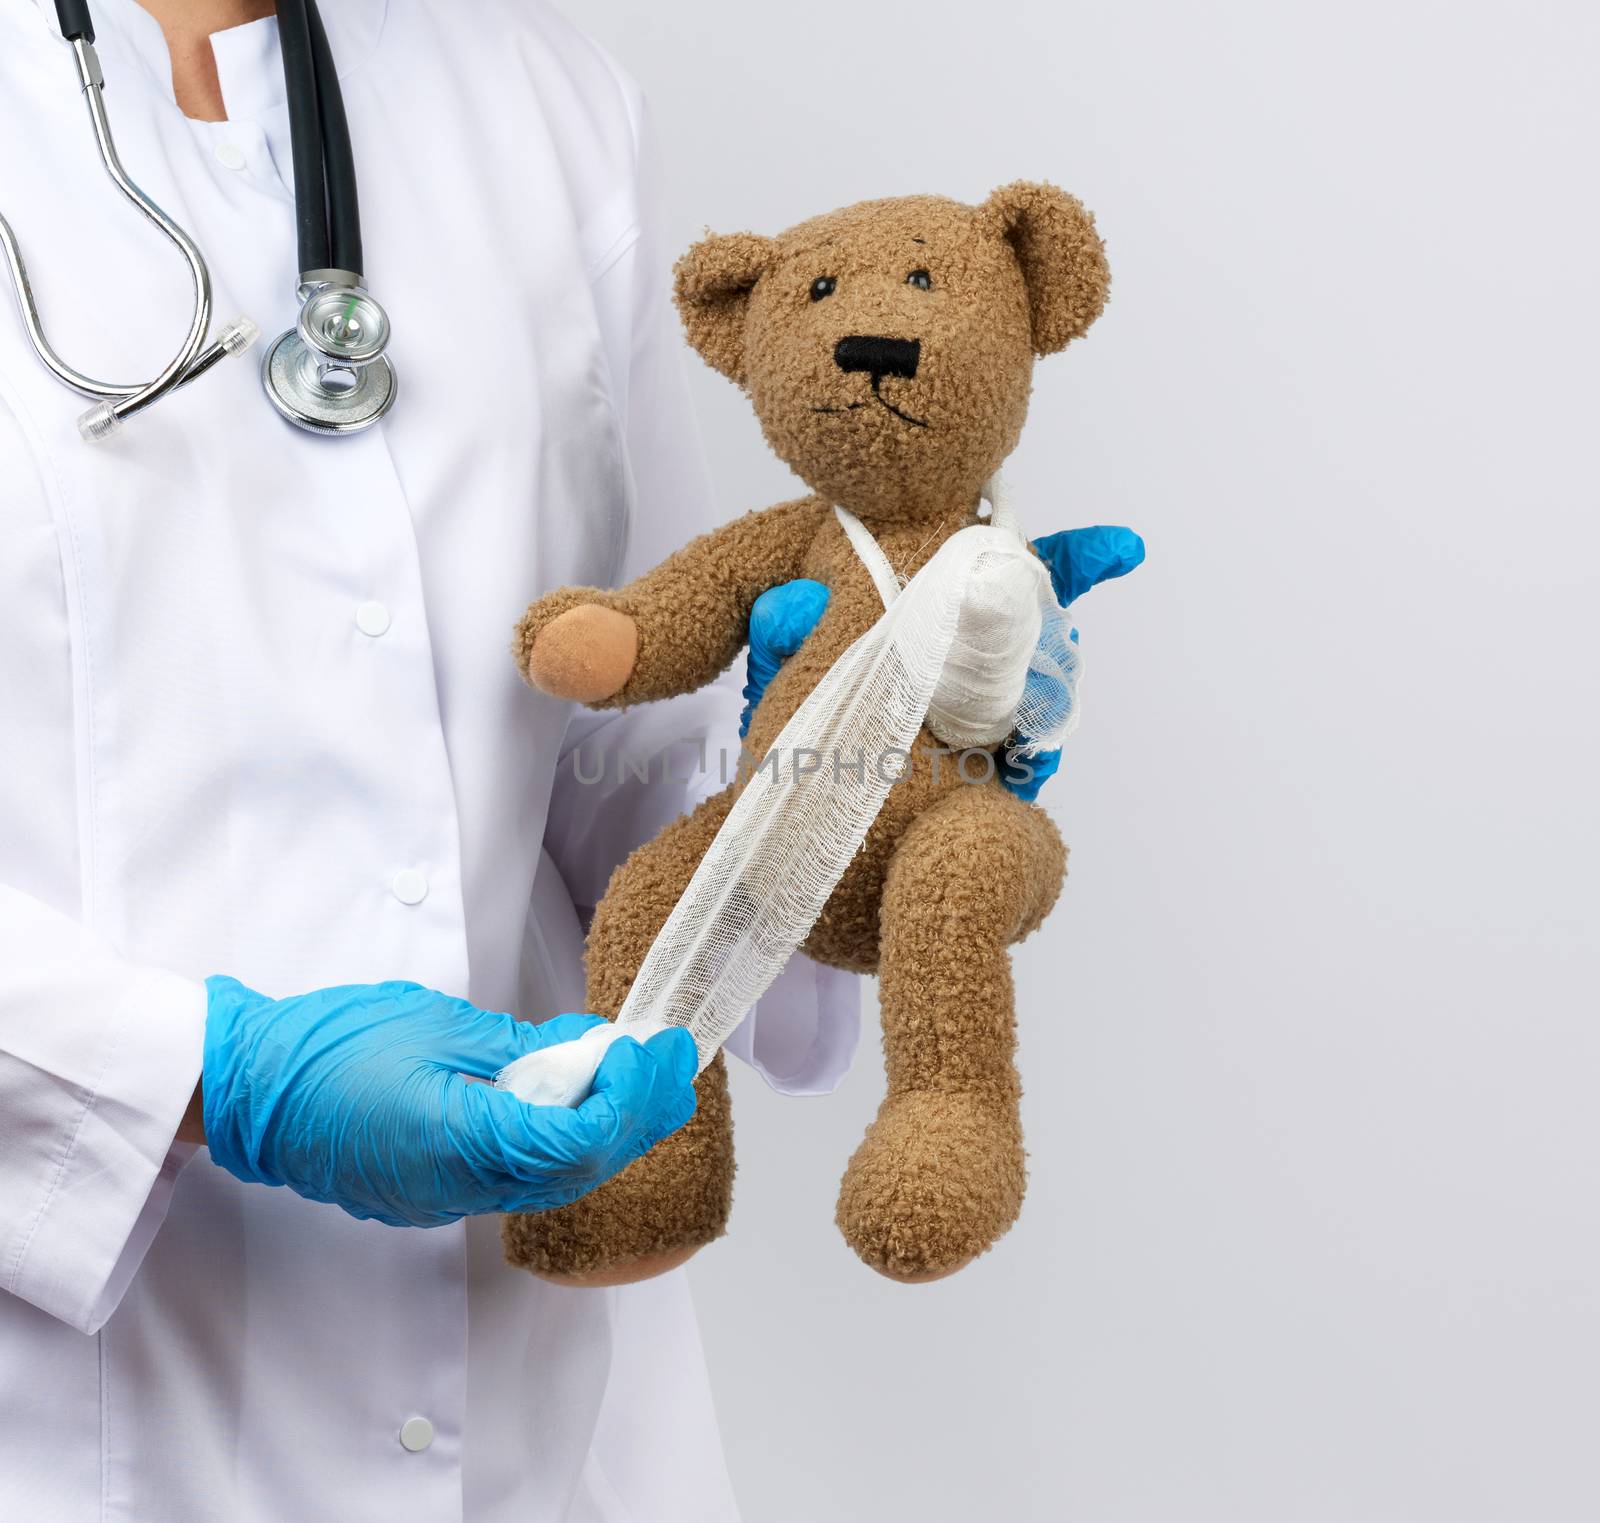 female medic holds brown teddy bear and bandages paw with white gauze bandage, concept of pediatrics and animal treatment